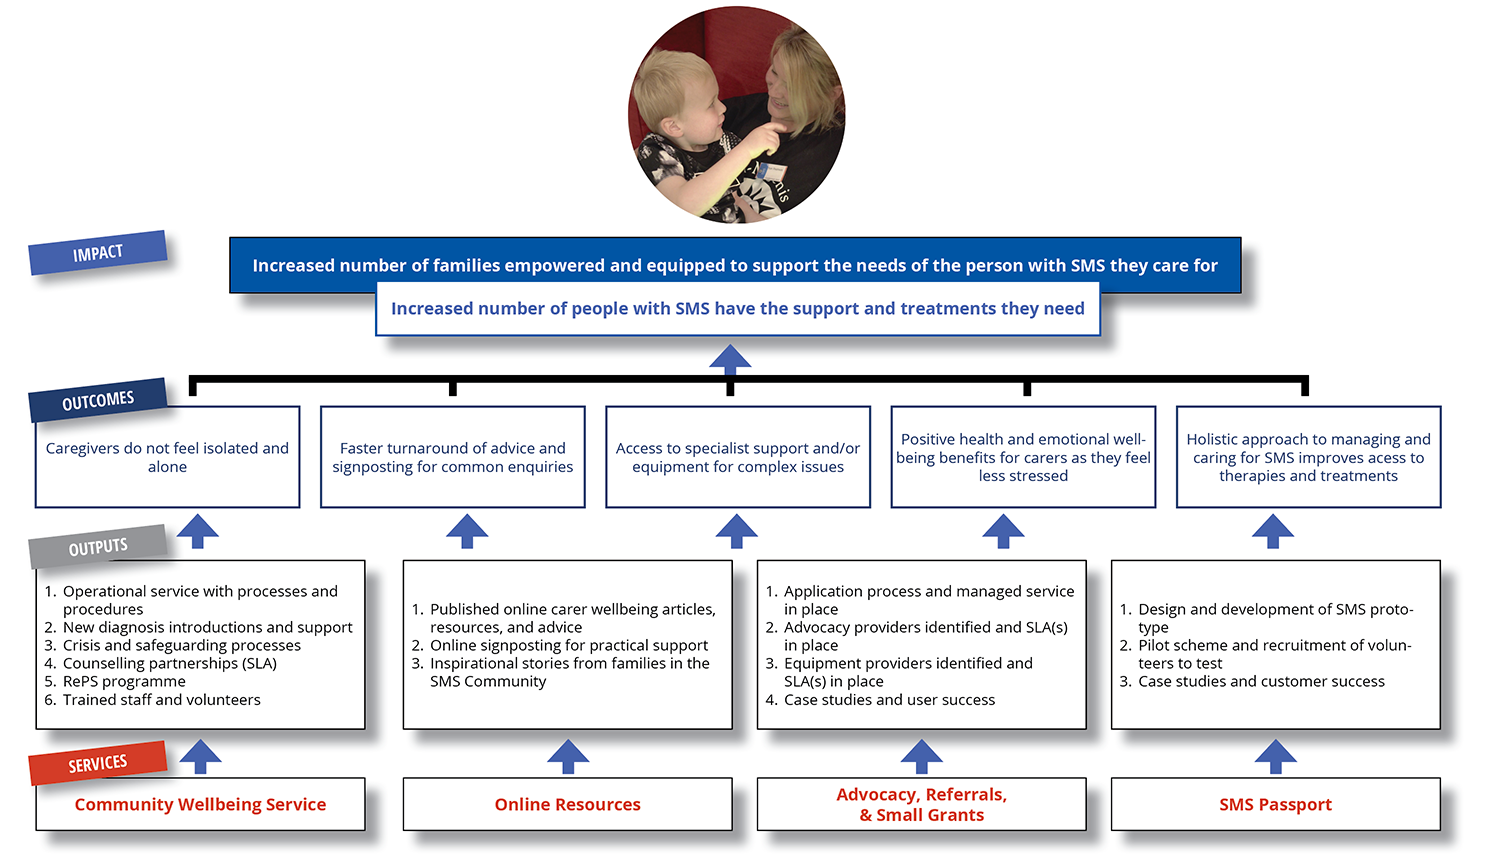 Carer Support Service theory of change model